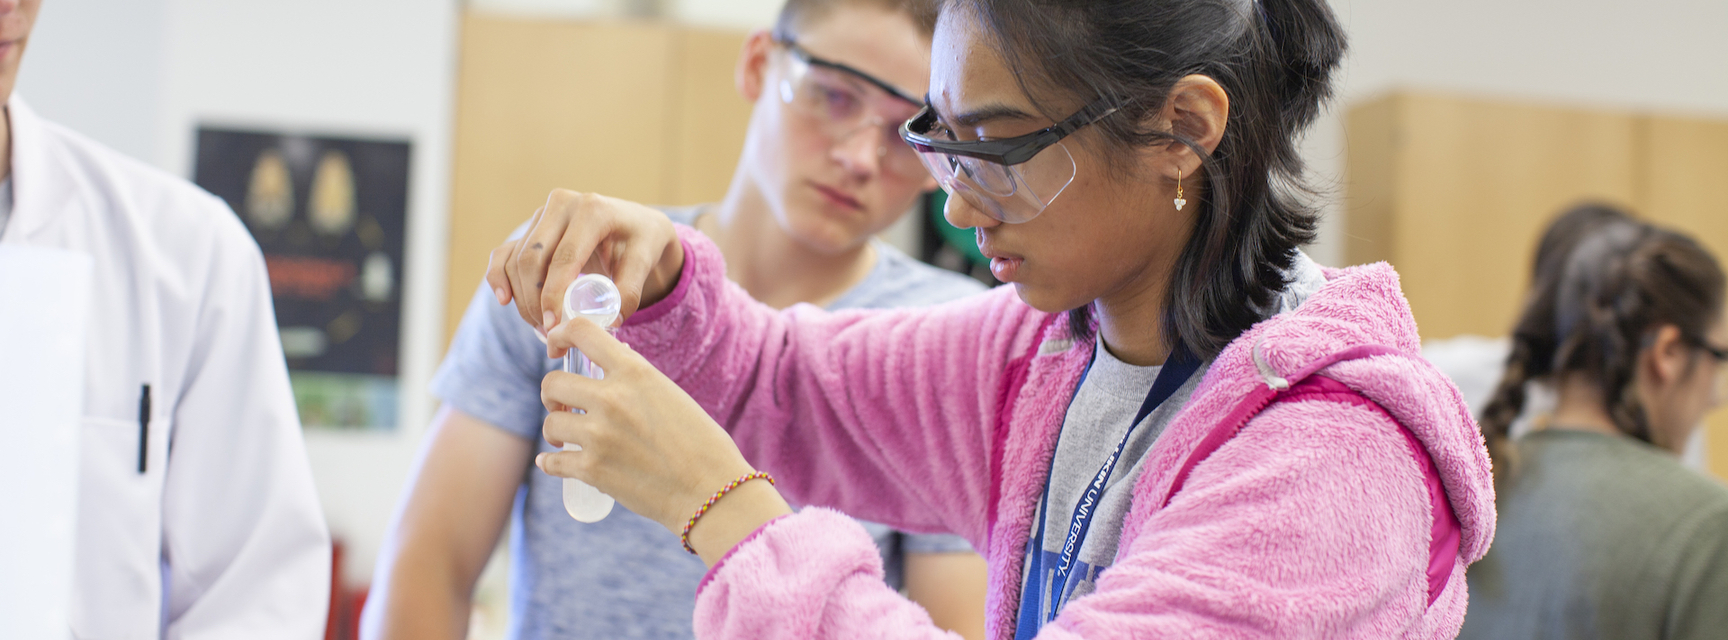 student measuring pouring fluid from a test tube